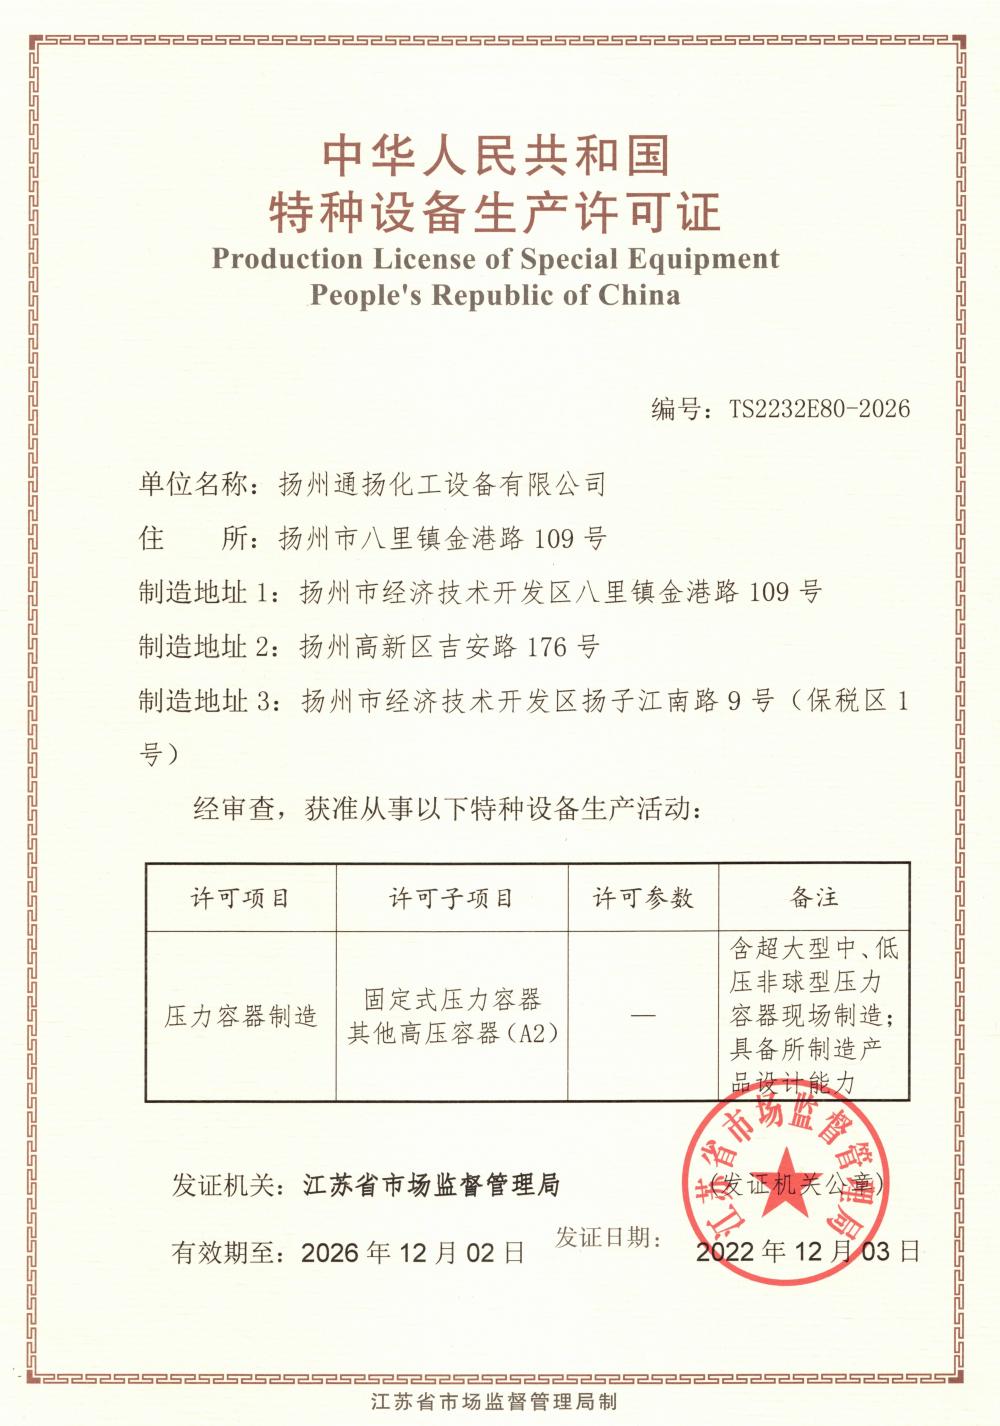 production License of Special Equipment People's Republic of China